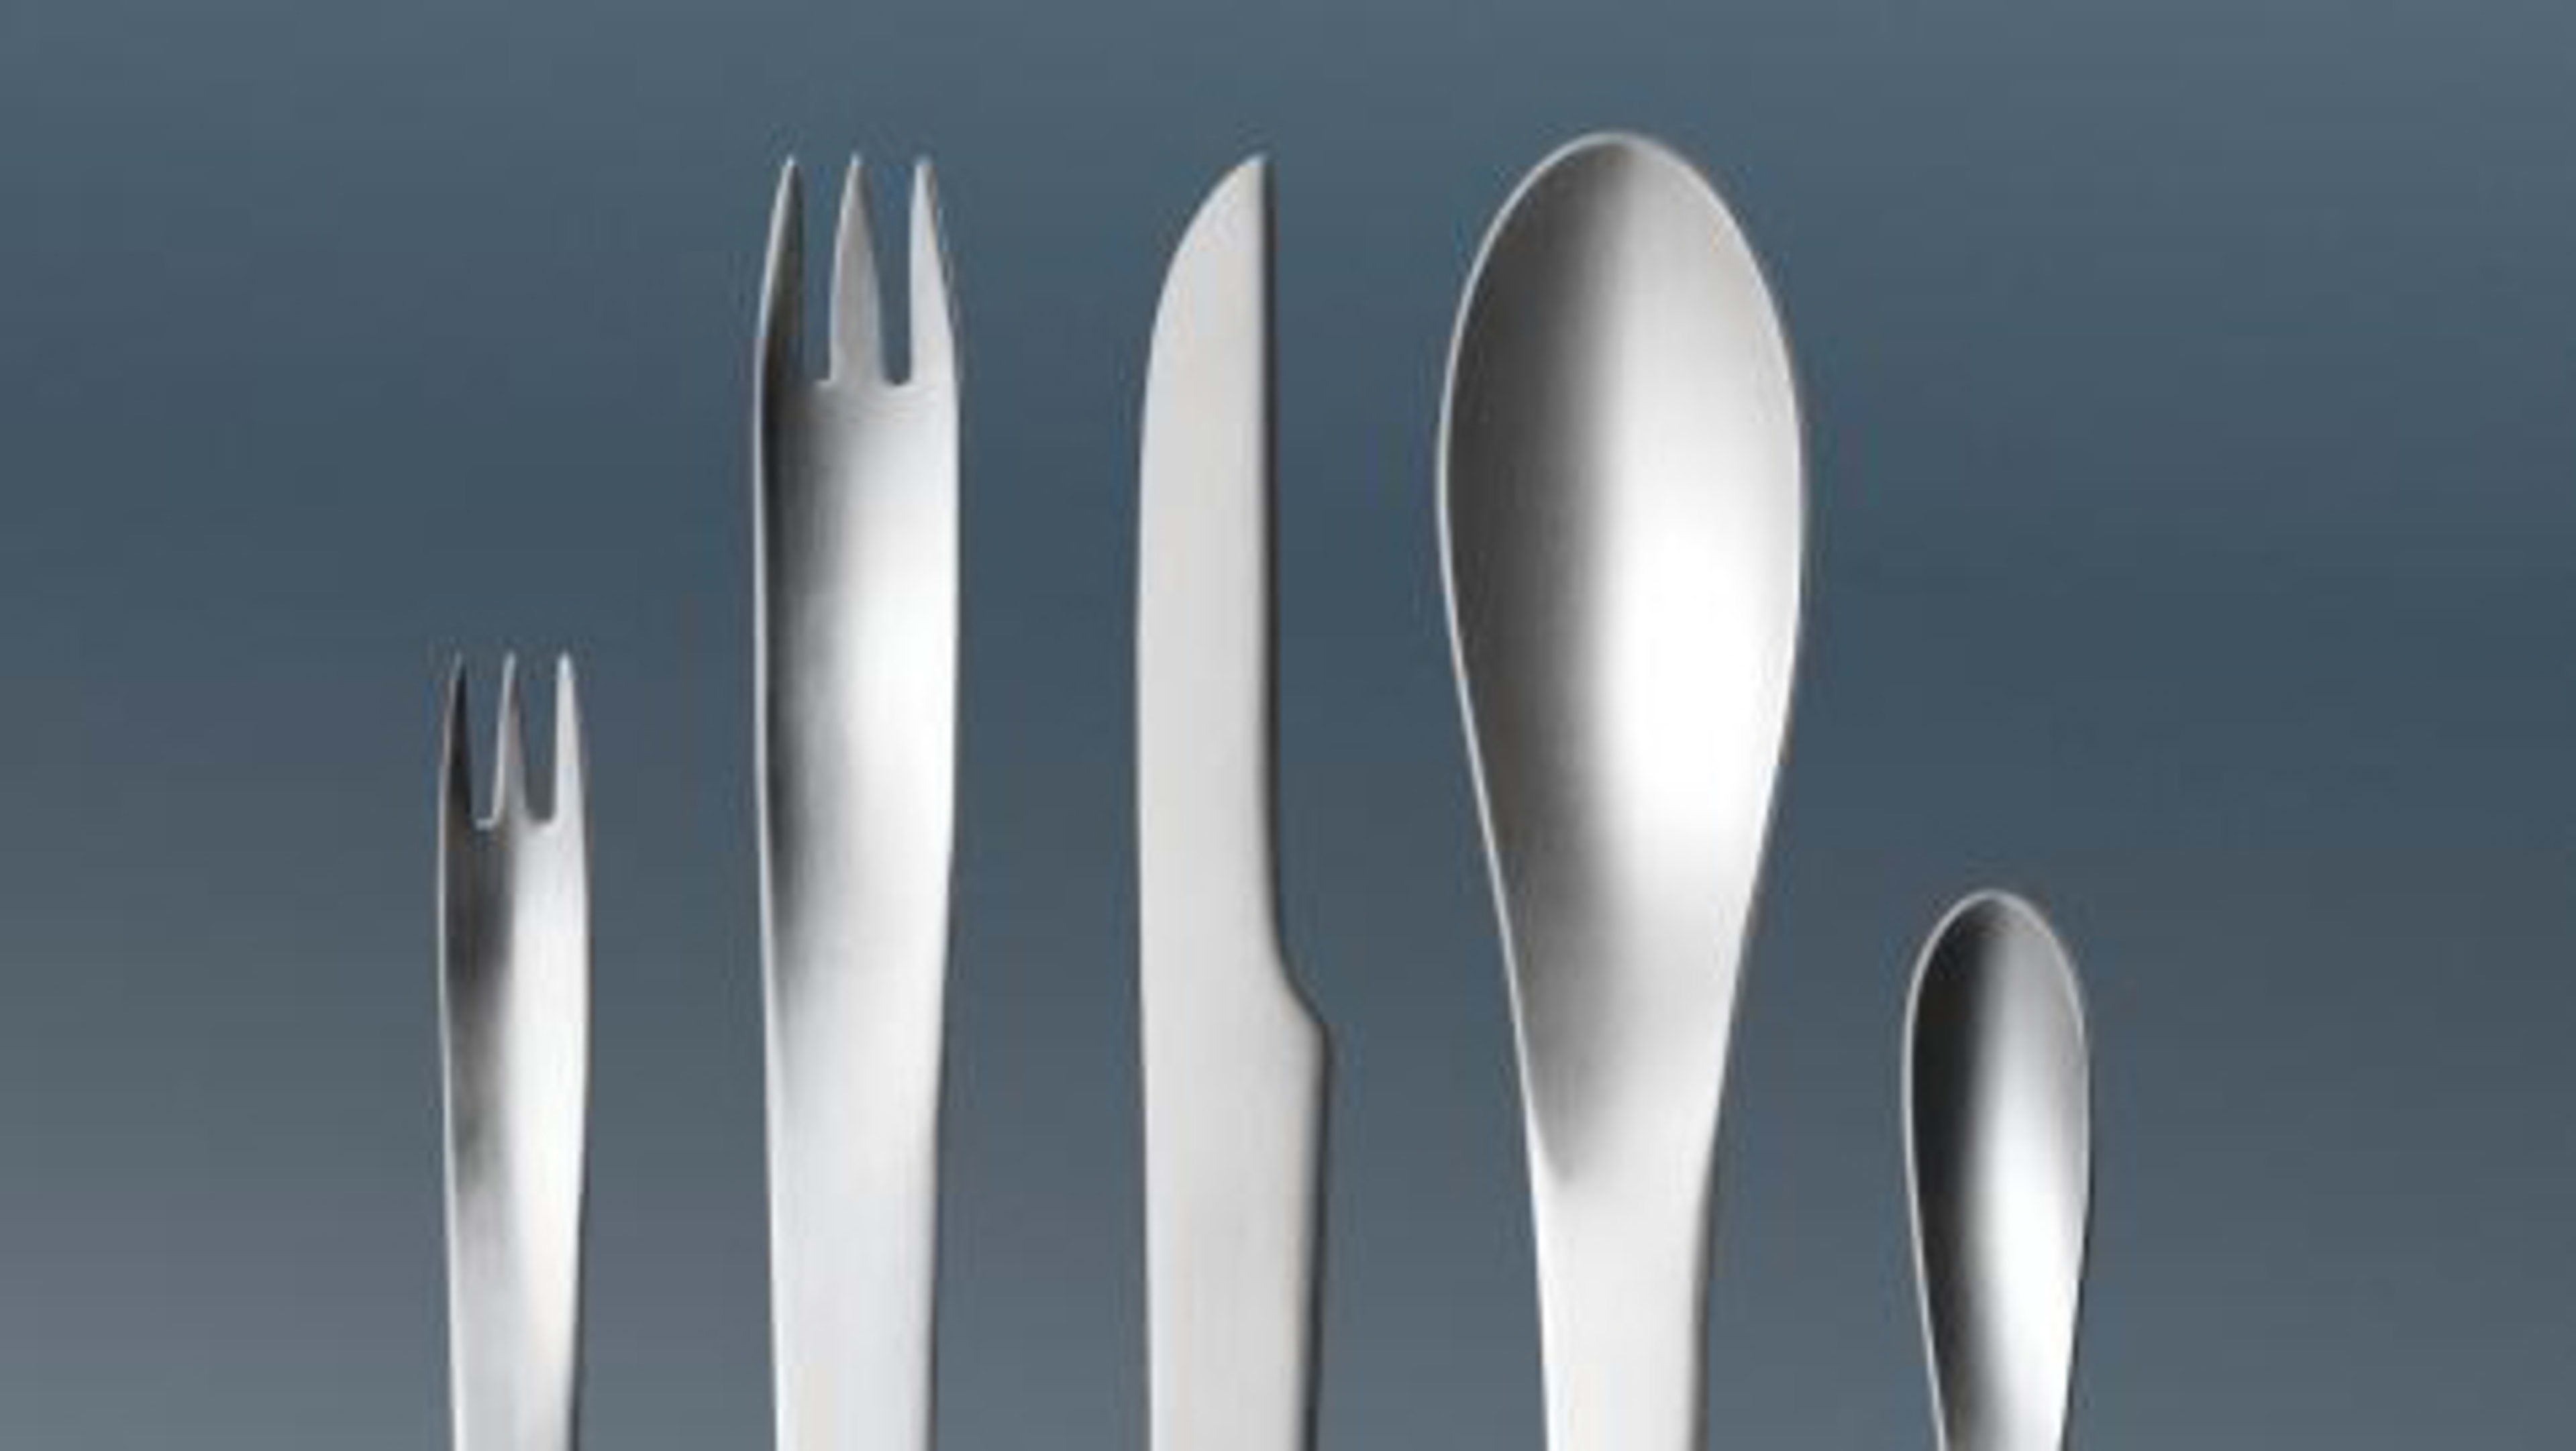 At Nearly $100 Per Person, Would You Use This Cutlery Set At Your Next Dinner Party?